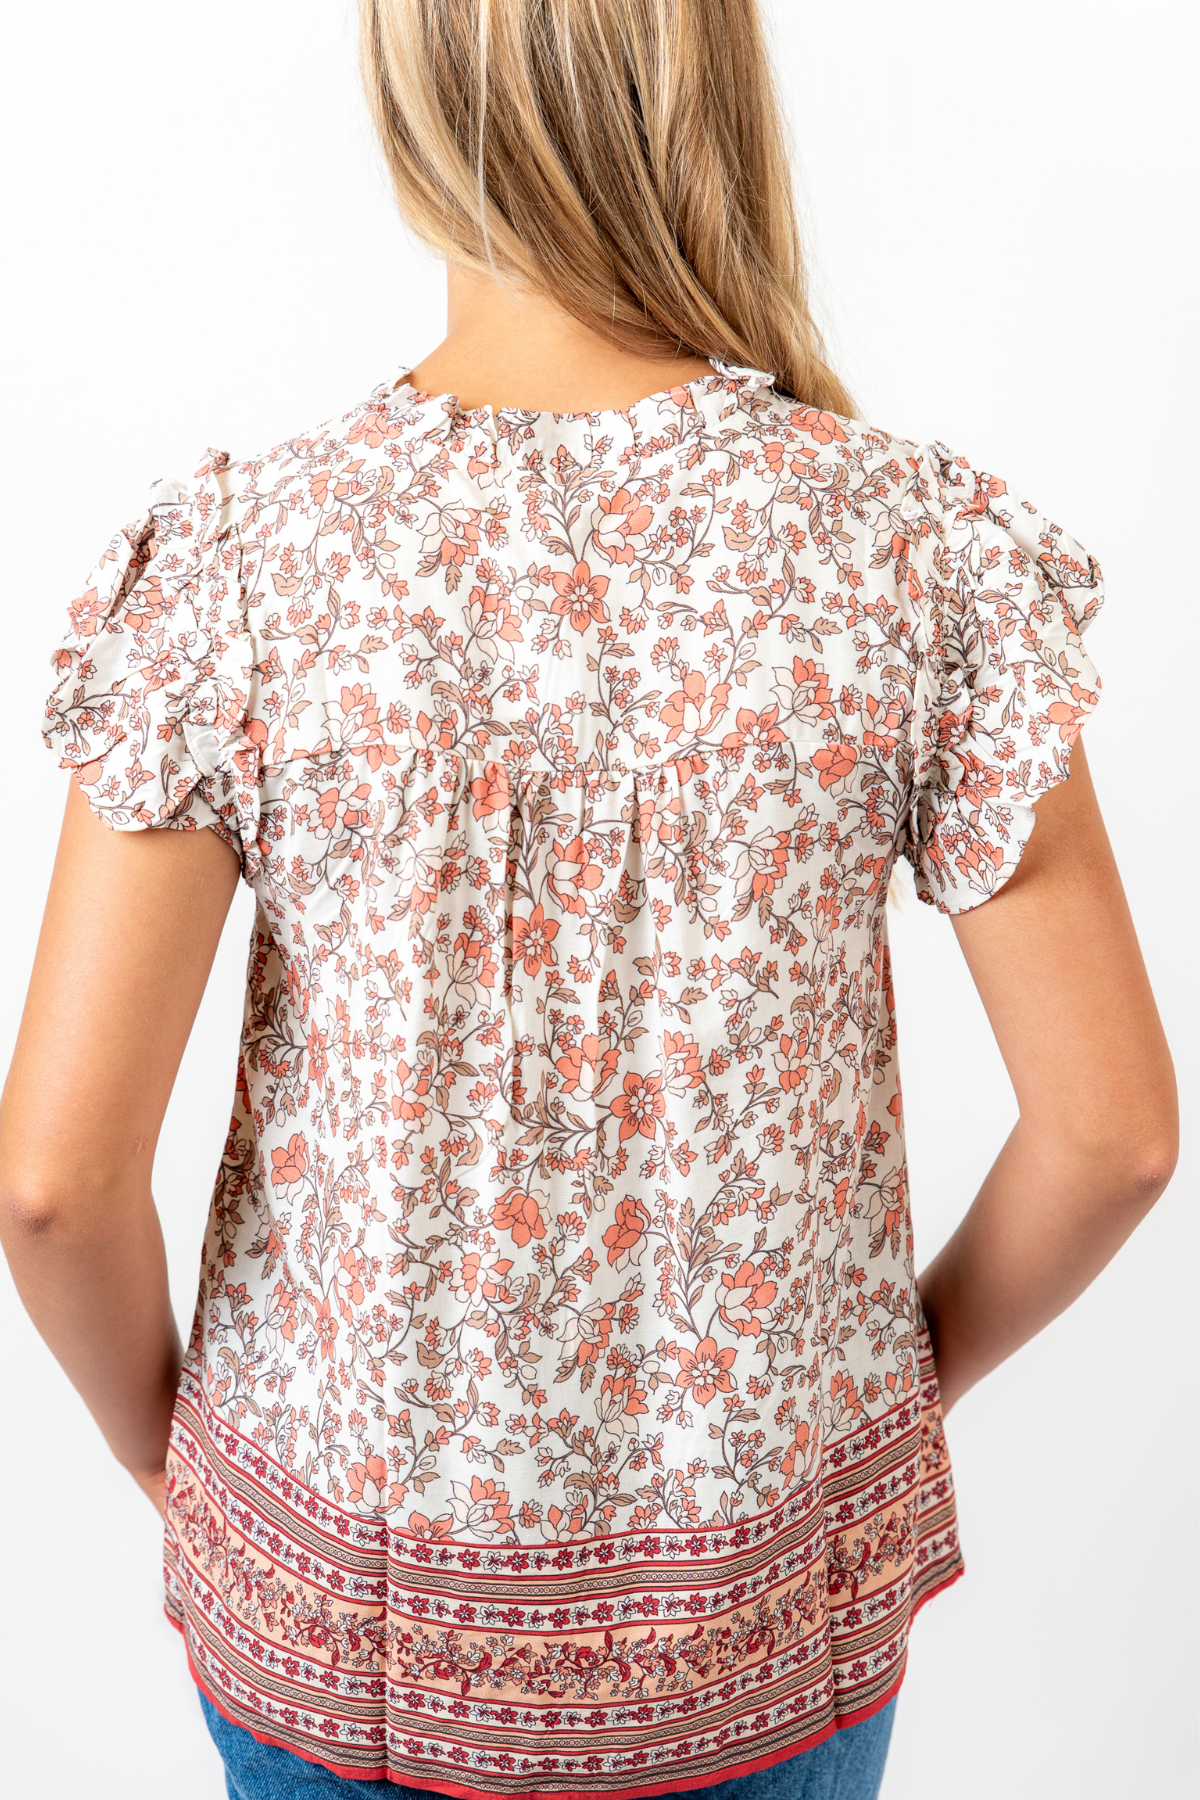 The Evie Floral Top